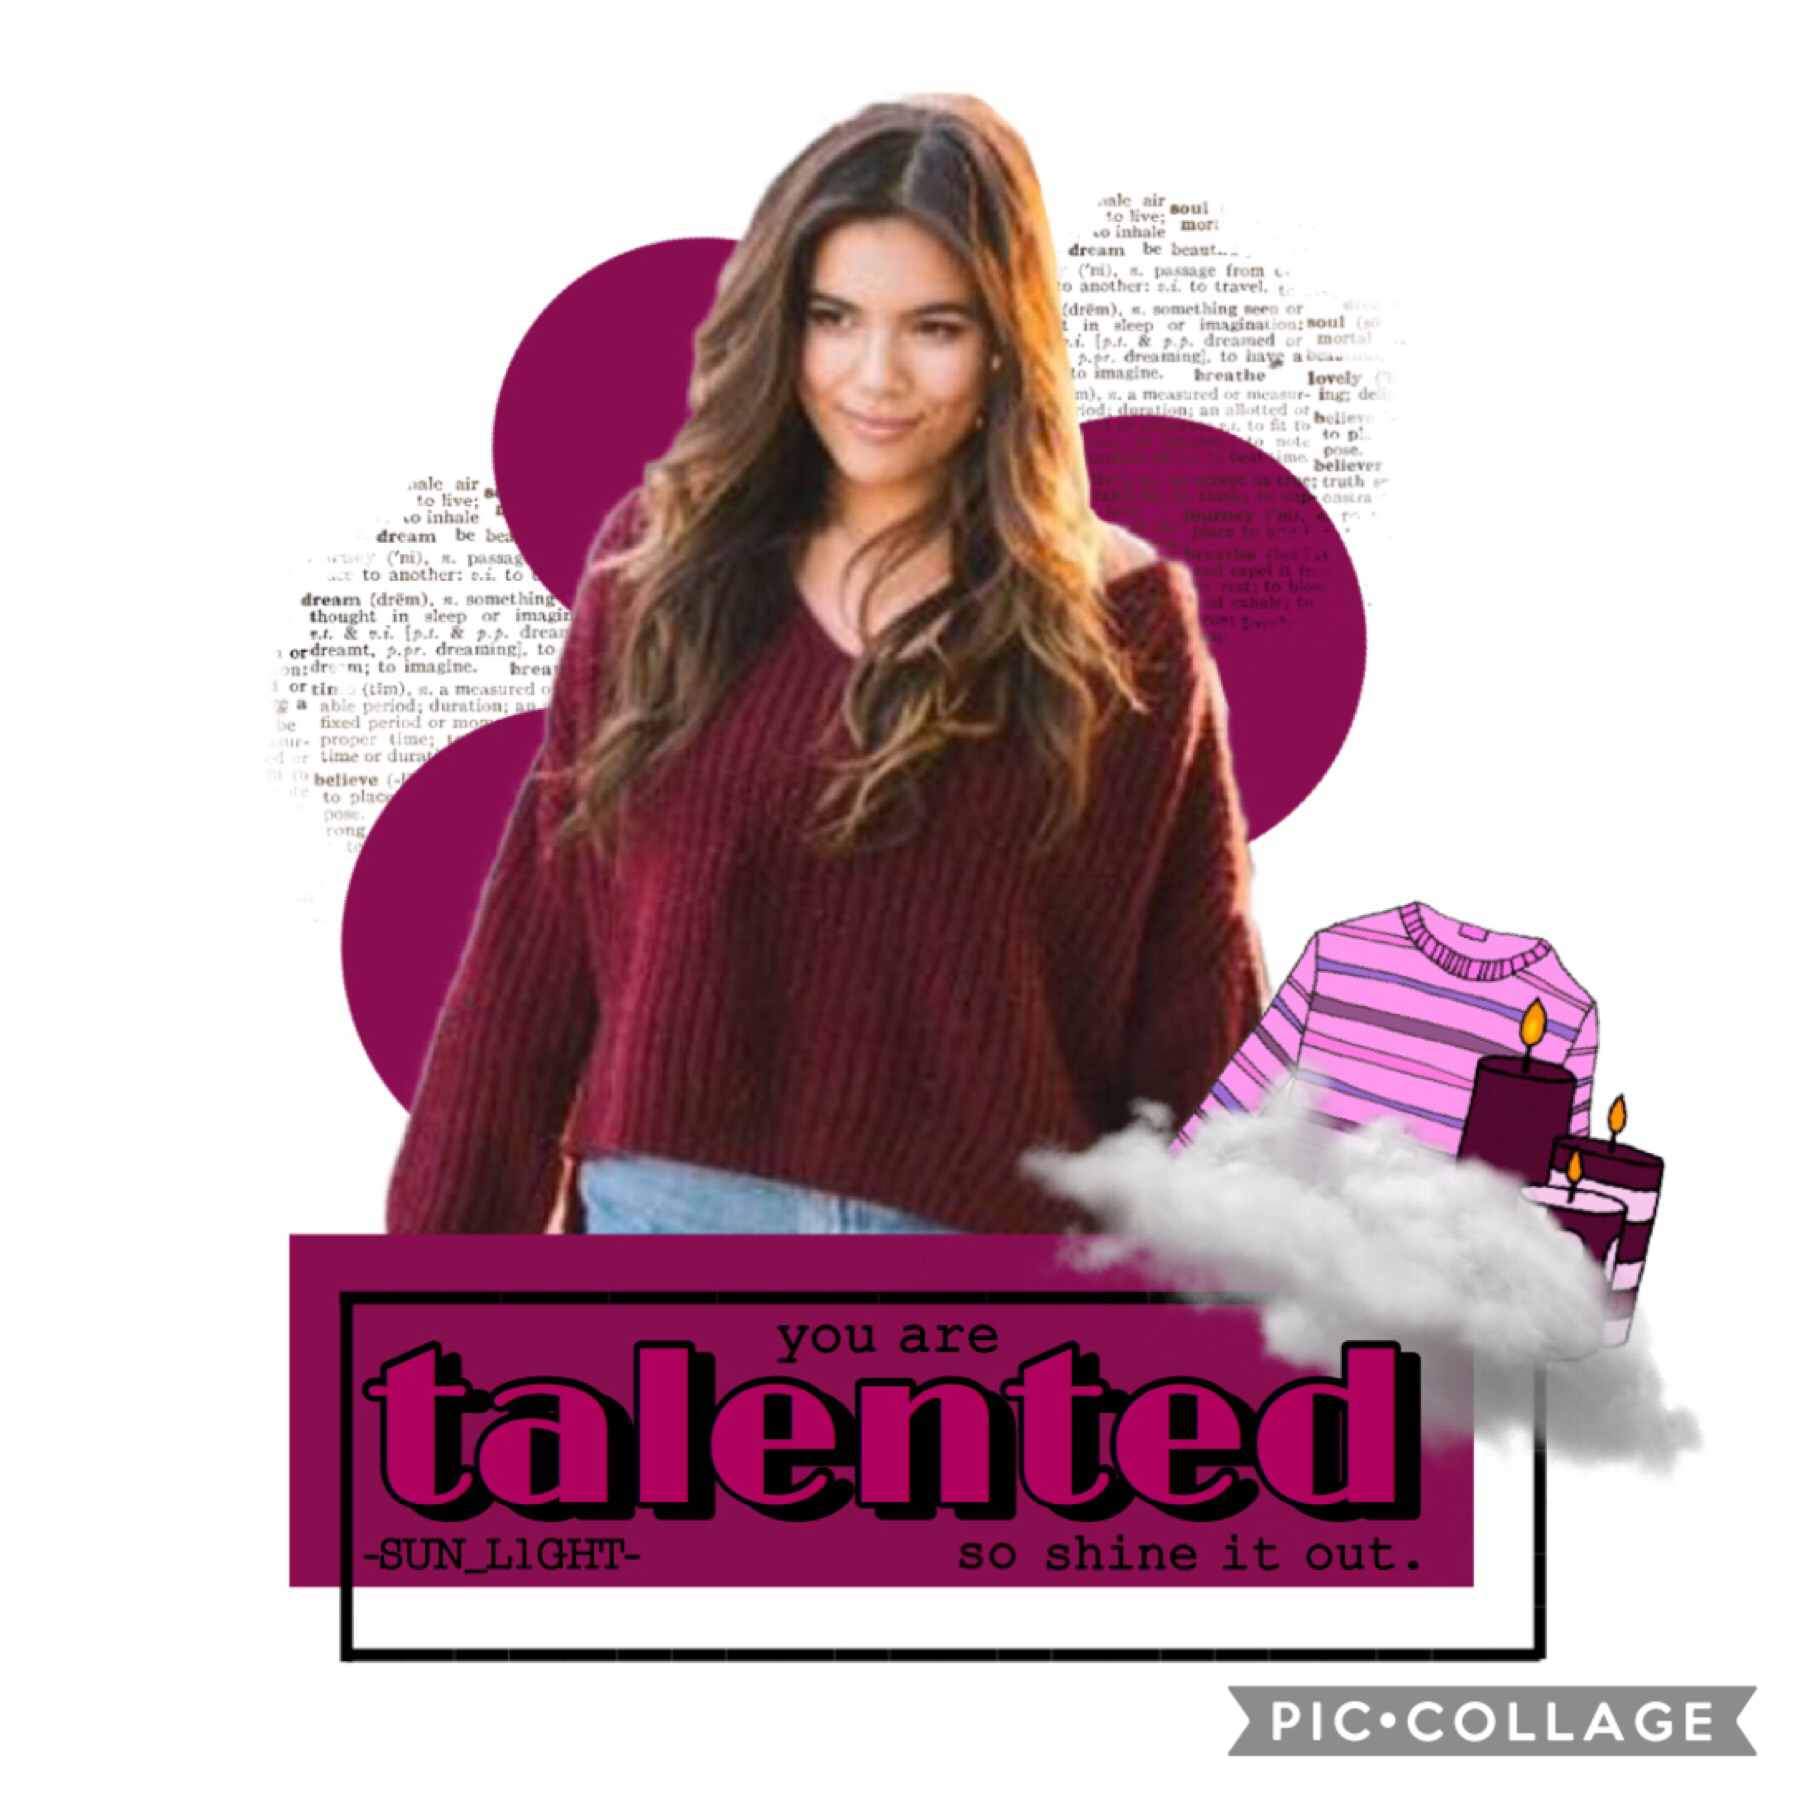 🐙Adelaine Morin!!🐙 this is the last collage of my theme!! Did you like it?? I sure did love making these❤️❤️ yeet here’s the date: 8-9-18
Well...let’s do a QOTD: LaurDIY or Alisha Marie?💞💞
AOTD:....hmmmmmmmmmm urmm both (actually LaurDIY but only like a b